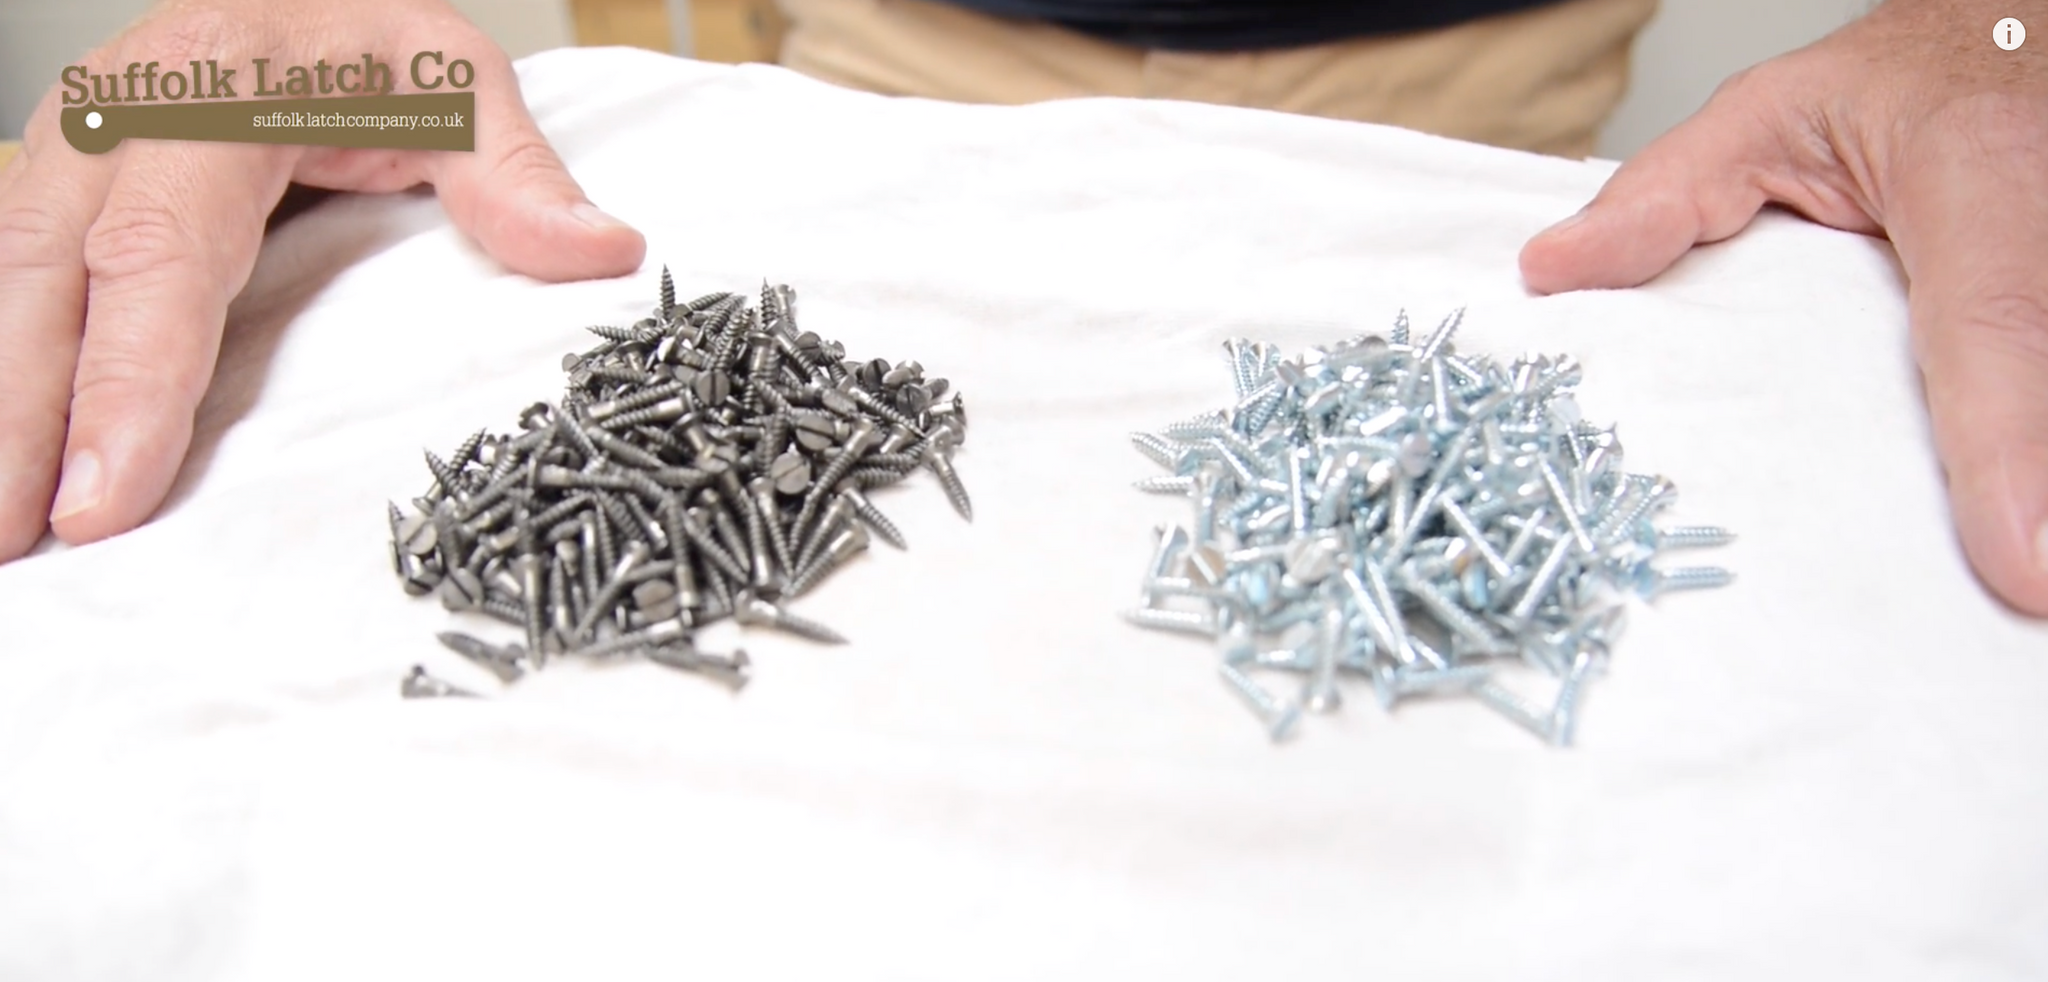 How to Strip Zinc Plating from Screws